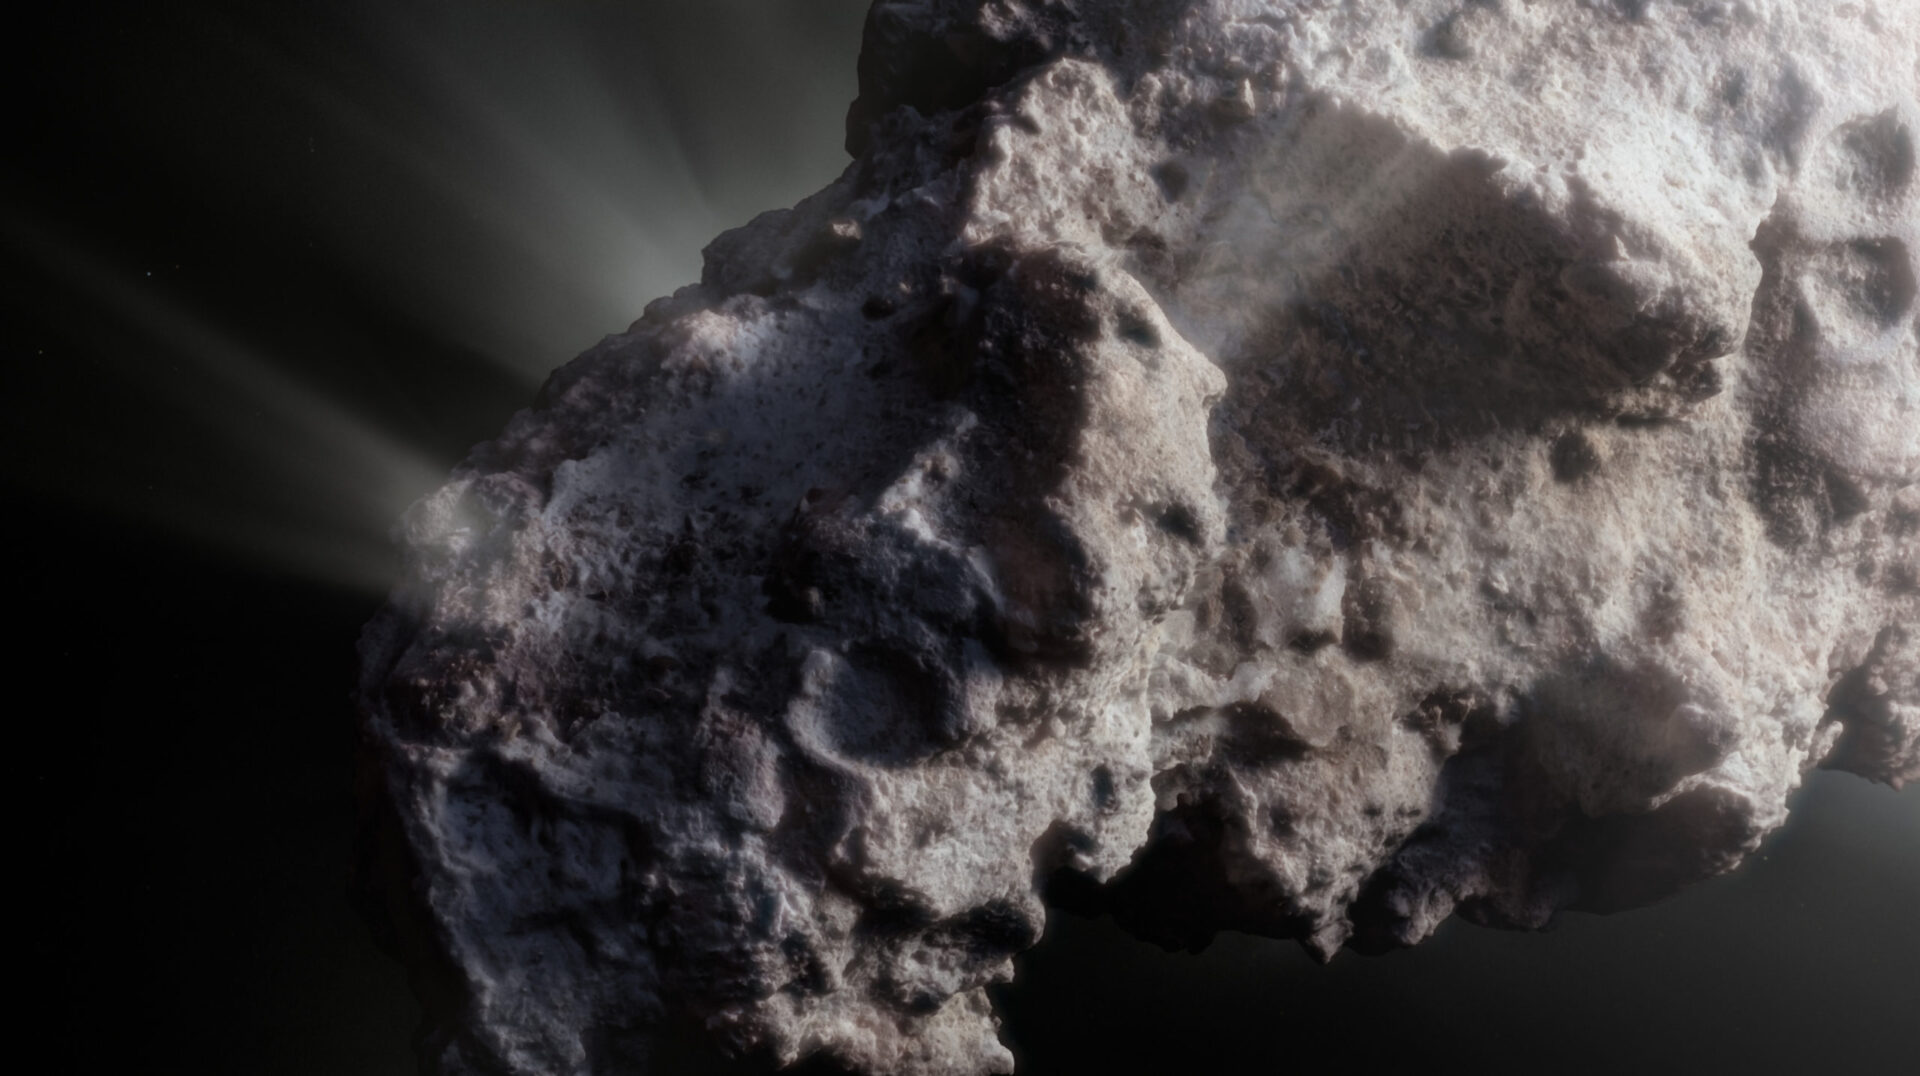 <p>This image shows an artist’s close-up view of what the surface of the comet might look like. 2I/Borisov was a visitor from another planetary system that passed by our Sun in 2019, allowing astronomers a unique view of an interstellar comet. While telescopes on Earth and in space captured images of this comet, we don’t have any close-up observations of 2I/Borisov. It is therefore up to artists to create their own ideas of what the comet’s surface might look like, based on the scientific information we have about it. Credit: ESO/M. Kormesser</p>
